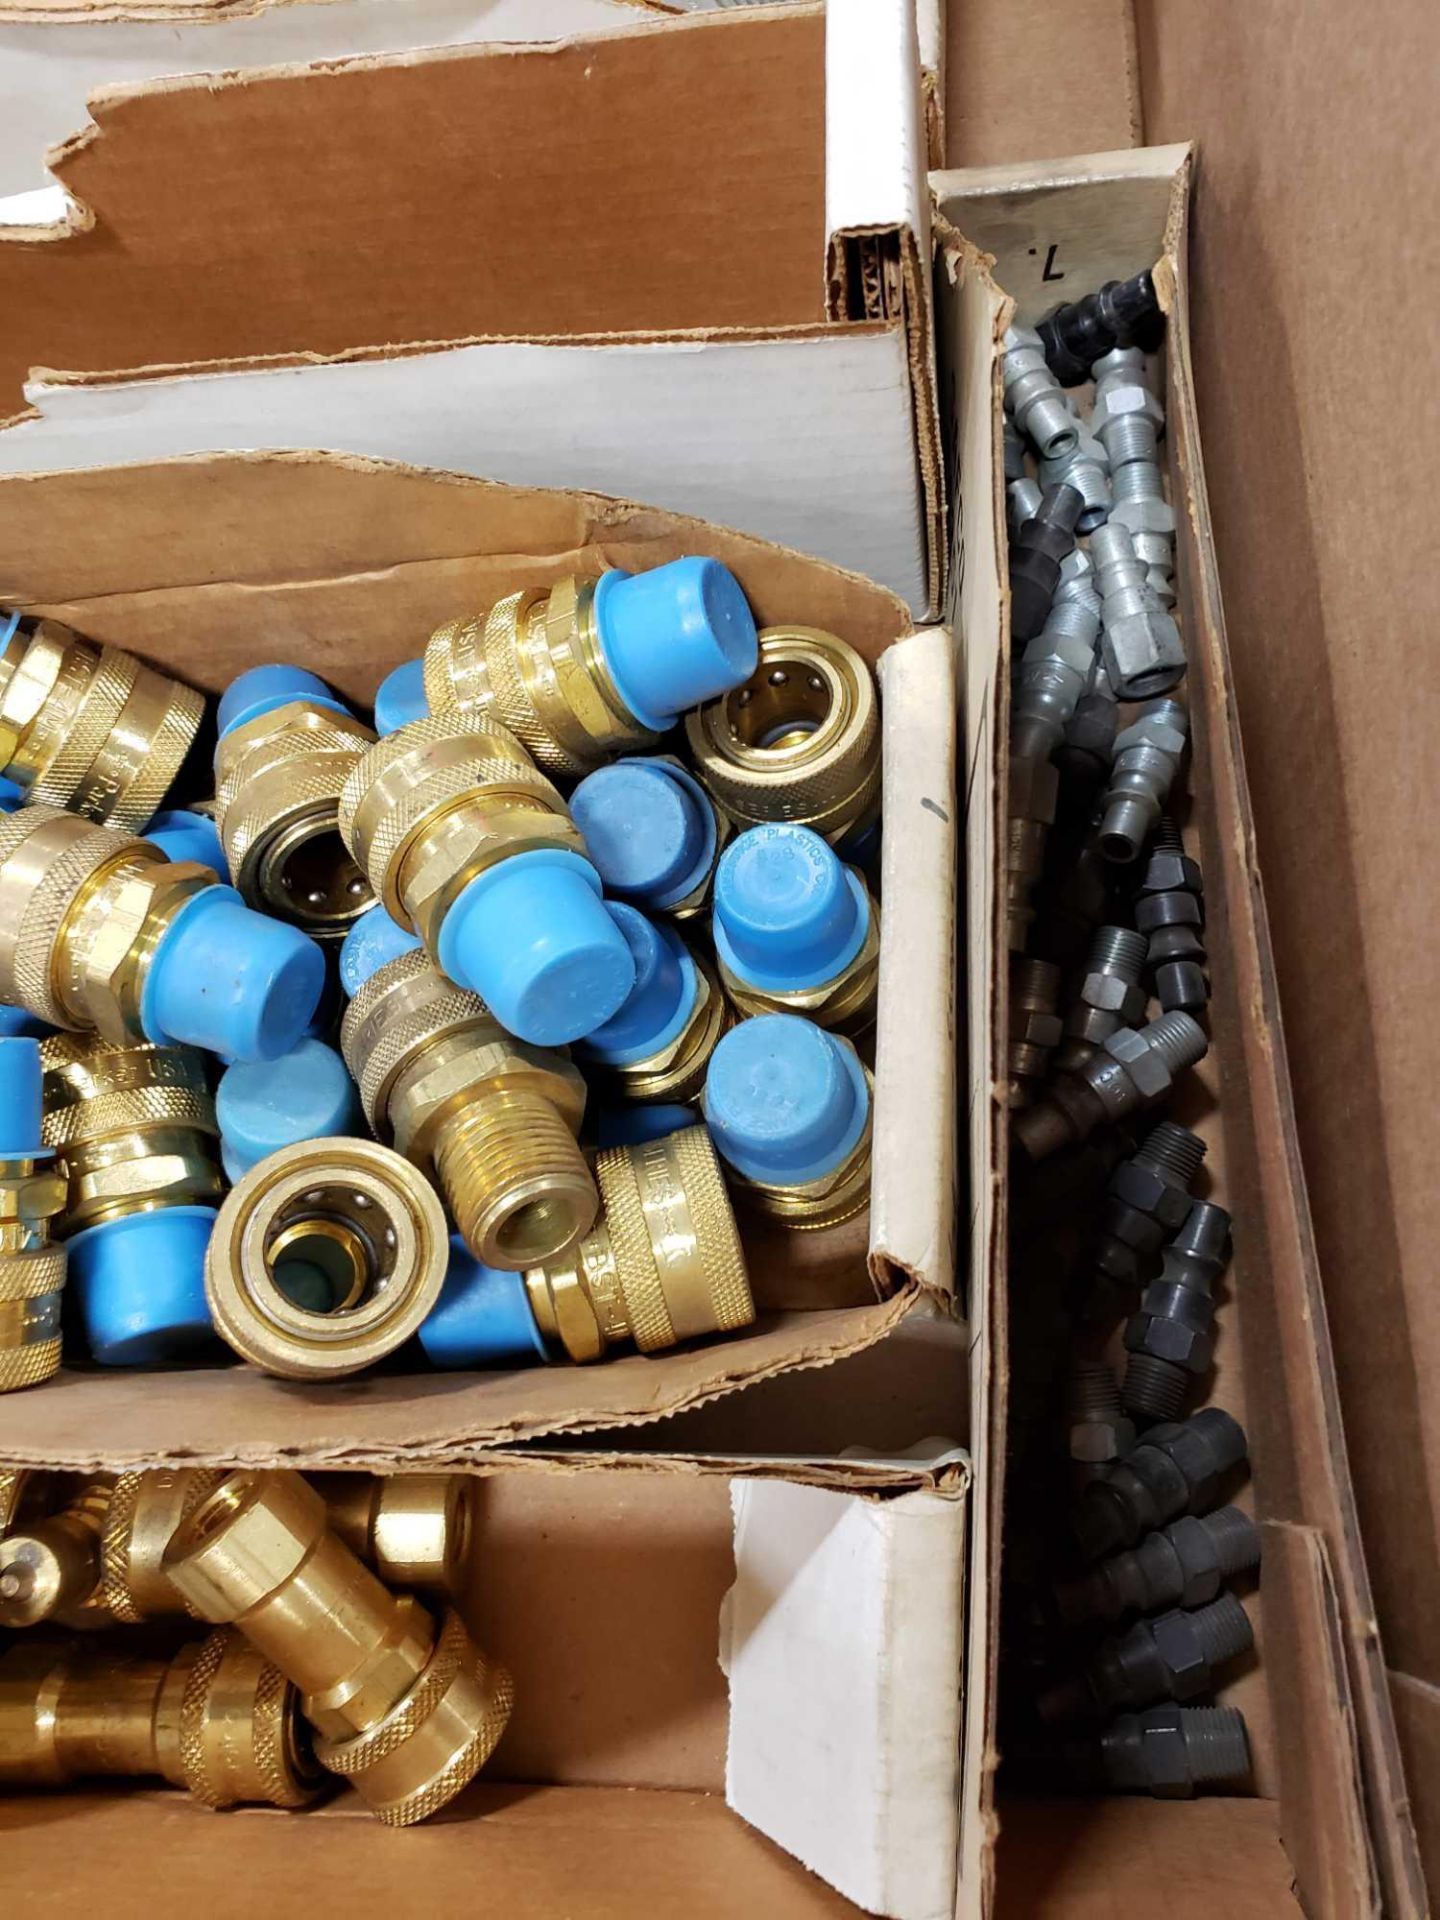 Lot of assorted hydraulic and pneumatic fittings. New as pictured. - Image 2 of 4